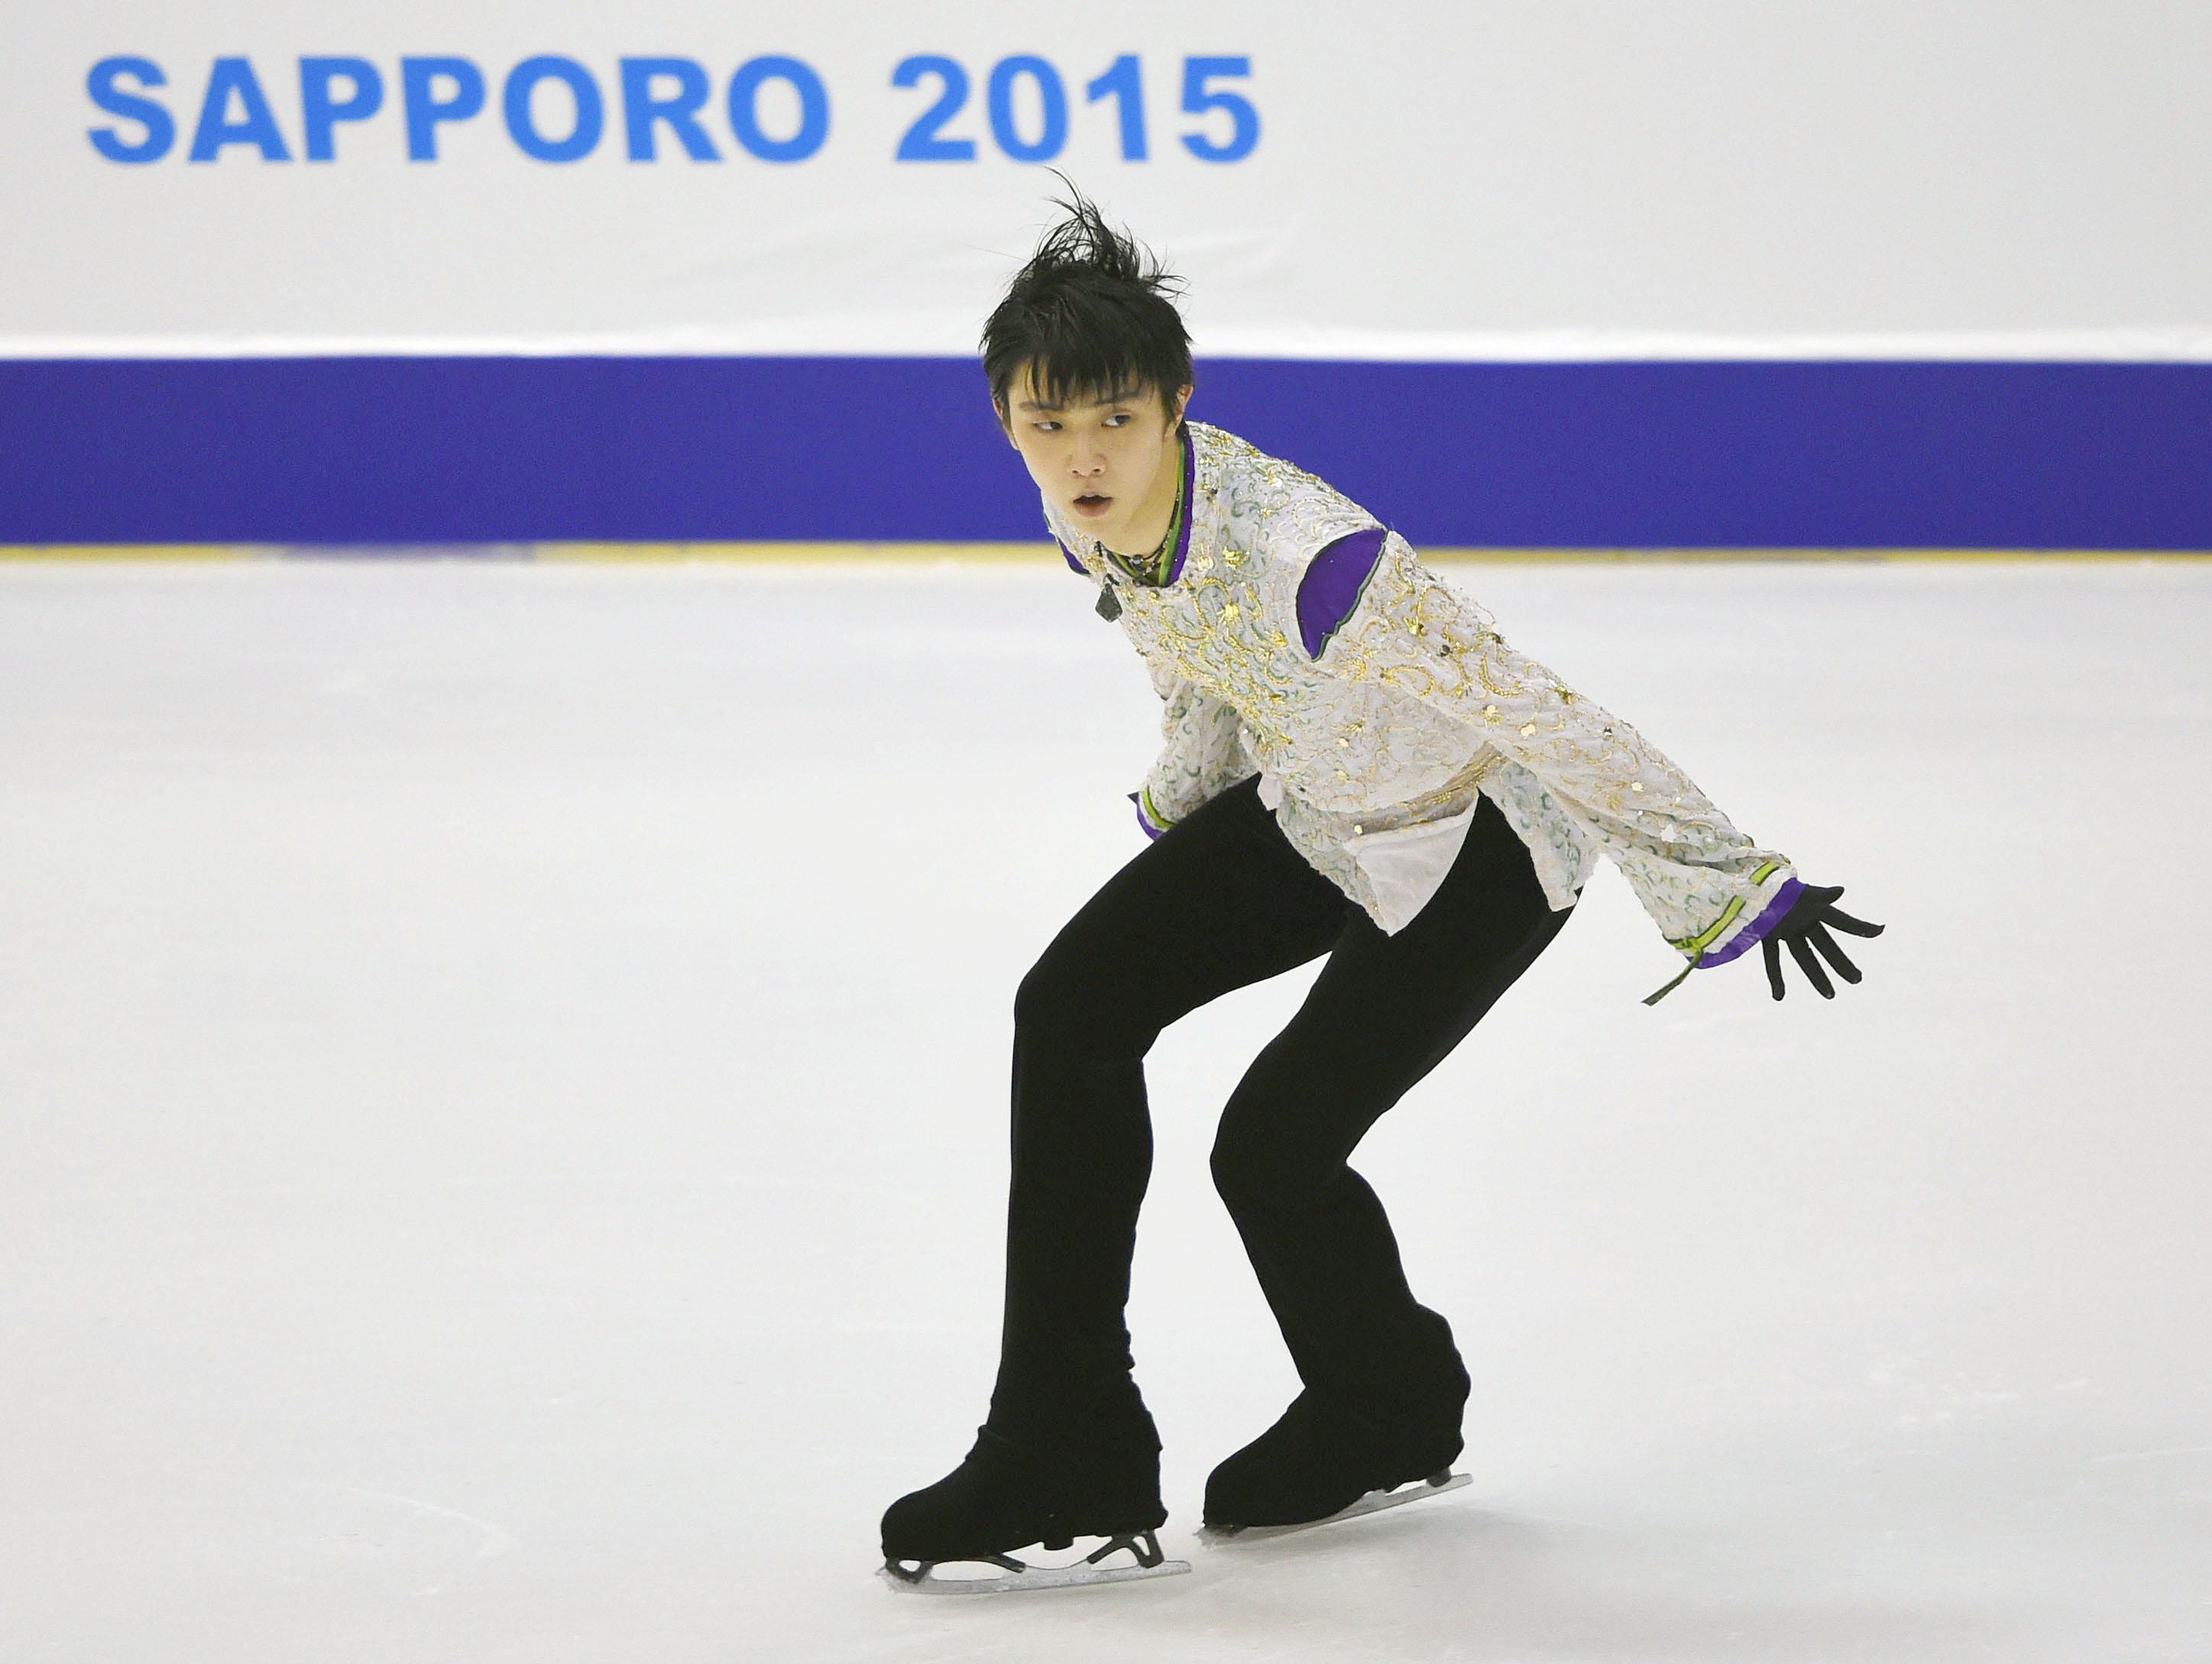 Yuzuru Hanyu performs his free skate routine on Saturday at the All-Japan Championships in Sapporo. Hanyu captured his fourth consecutive national title. | KYODO